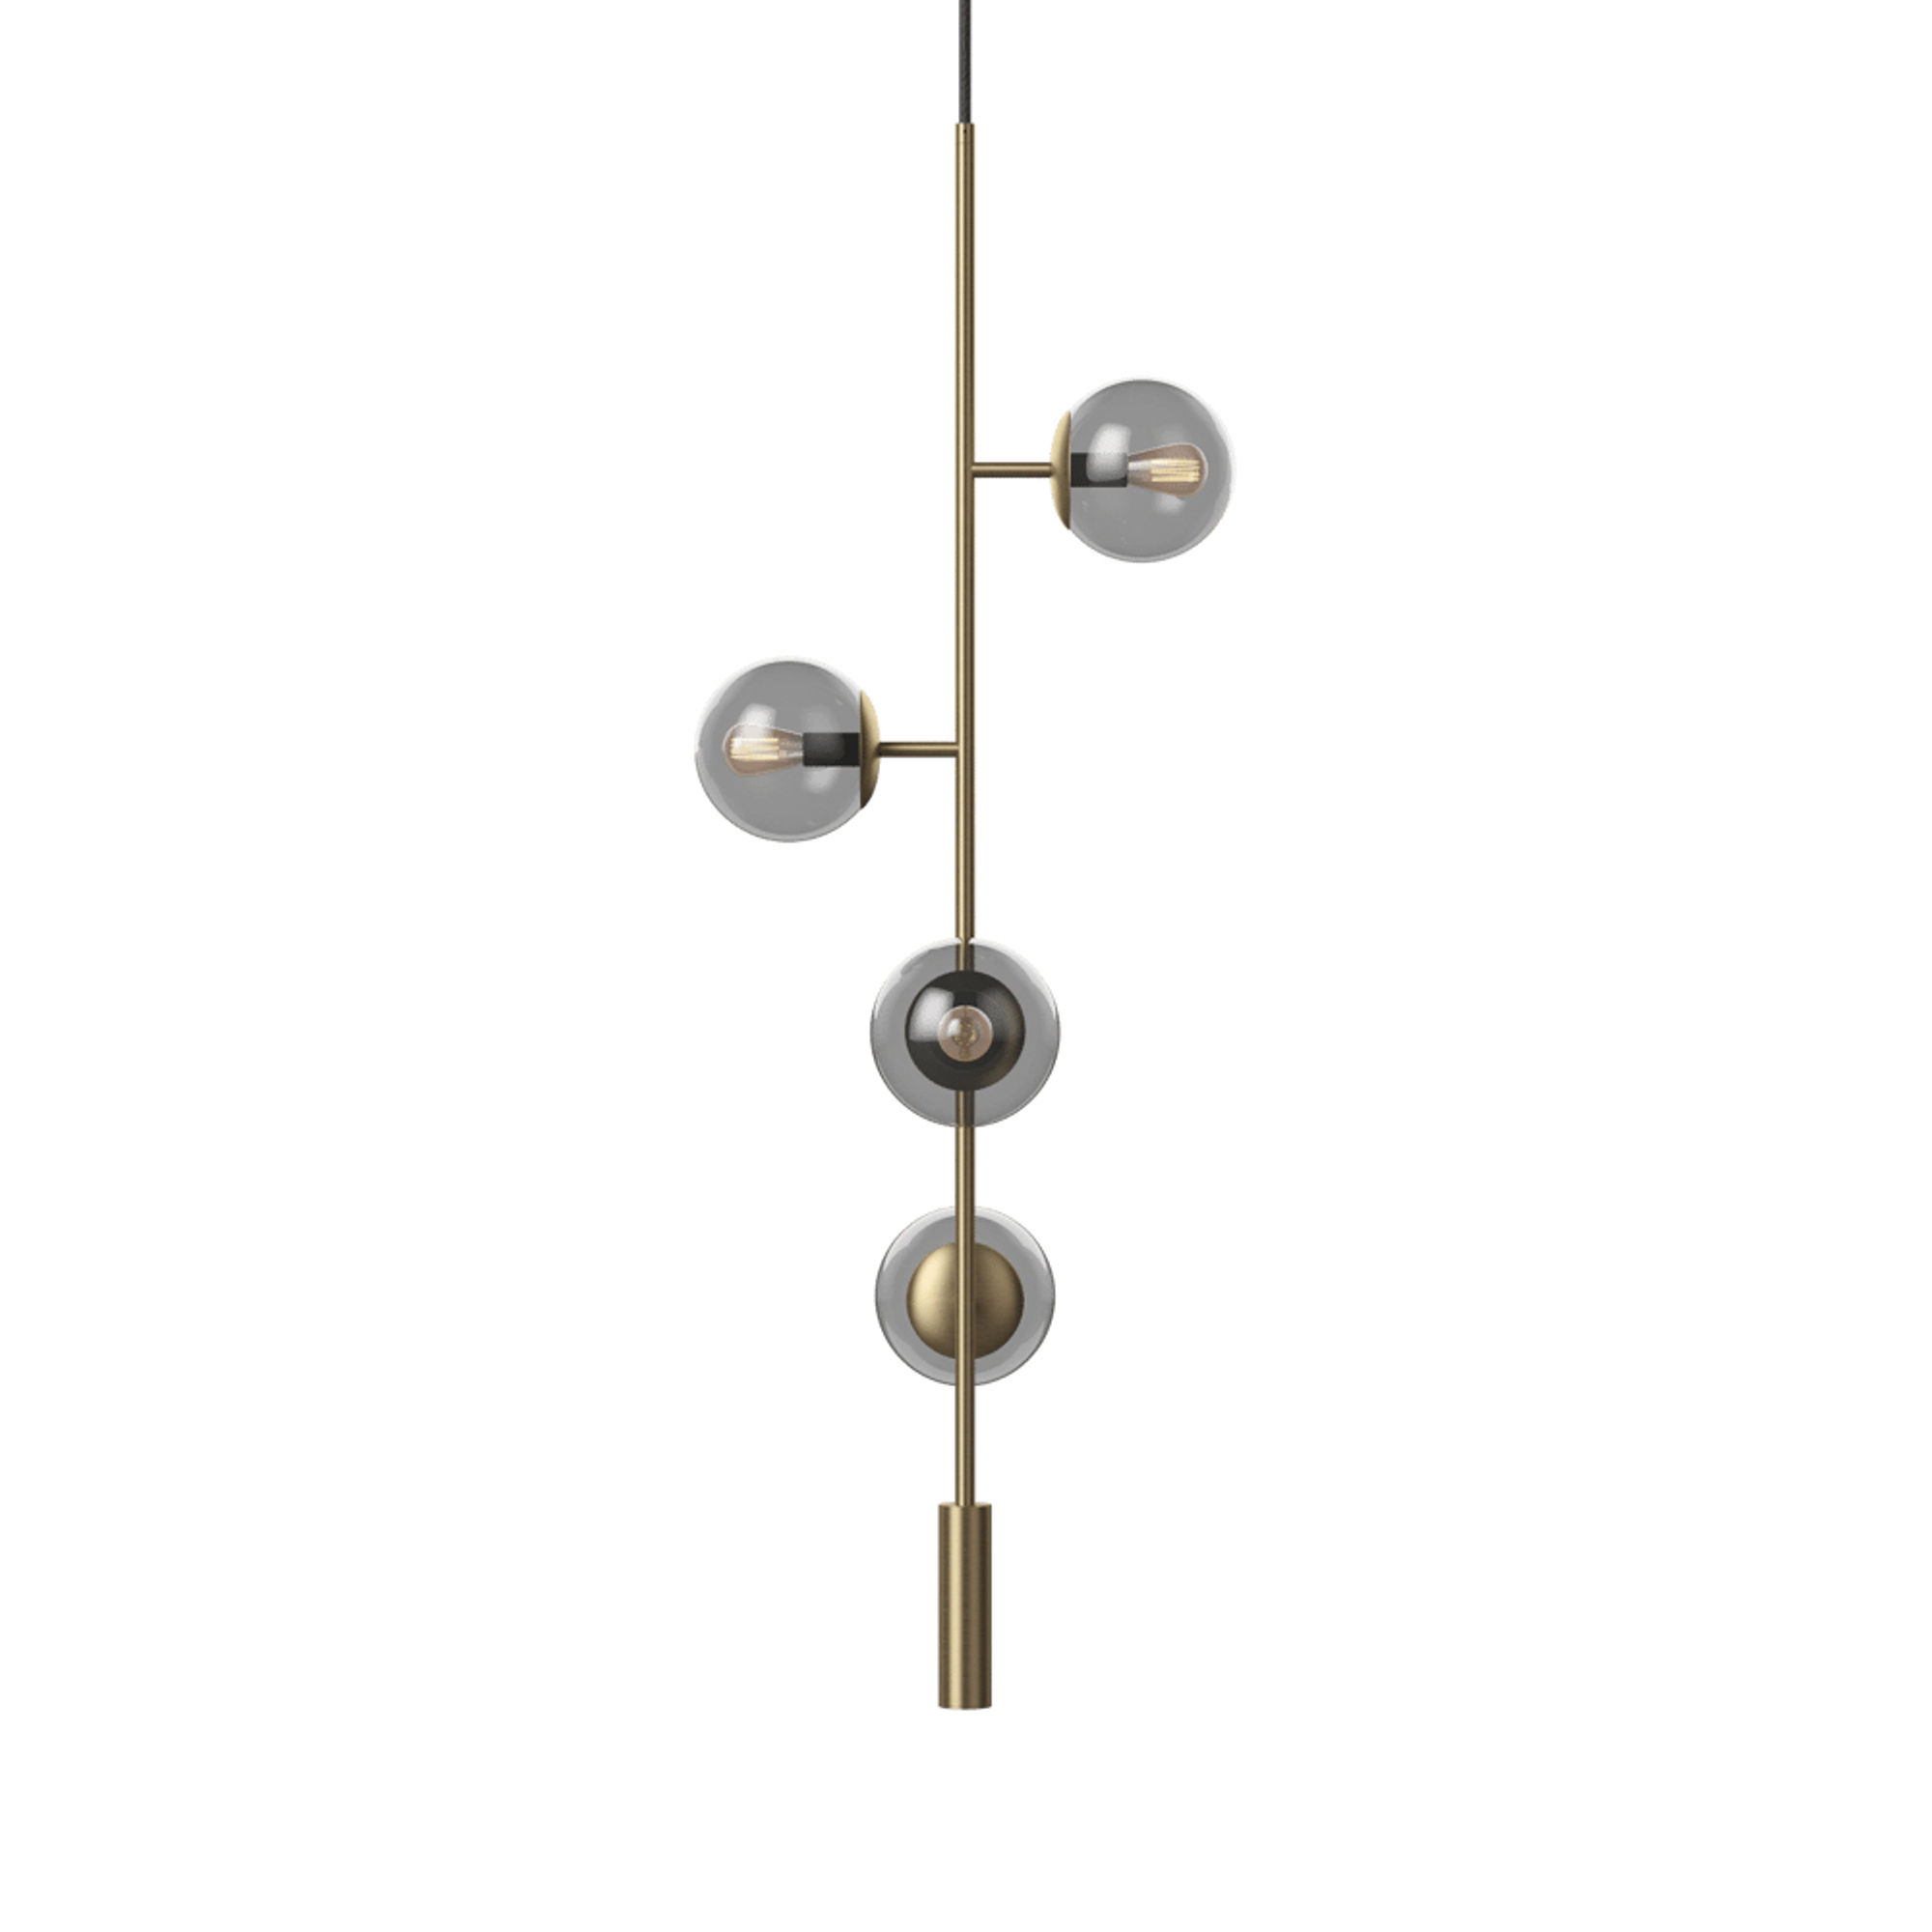 The Orb Lounge Pendant by Bolia 0